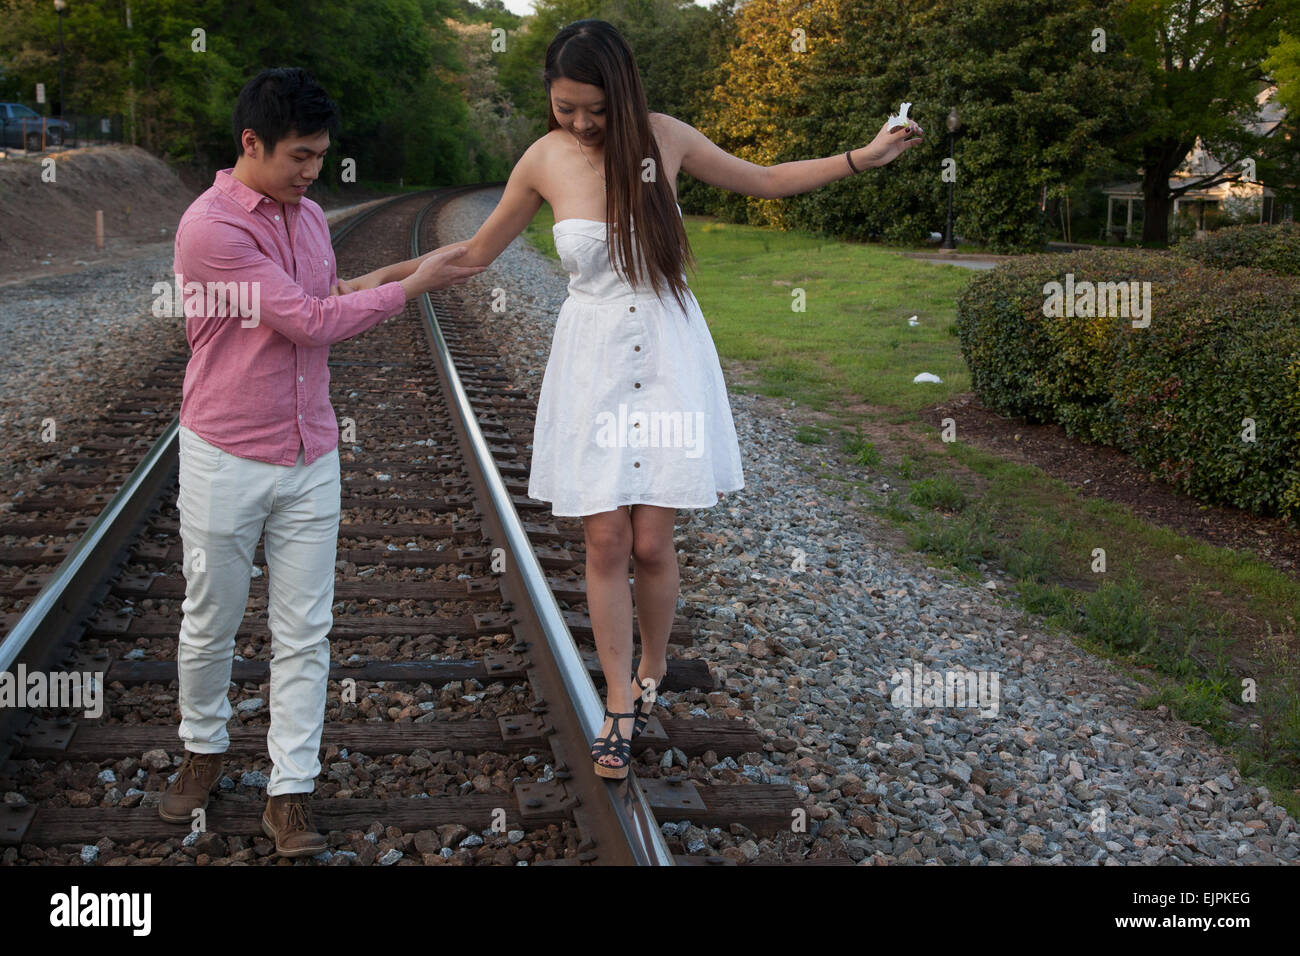 Romantic Asian couple playing outside on railroad tracks, being affectionate and smiling Stock Photo